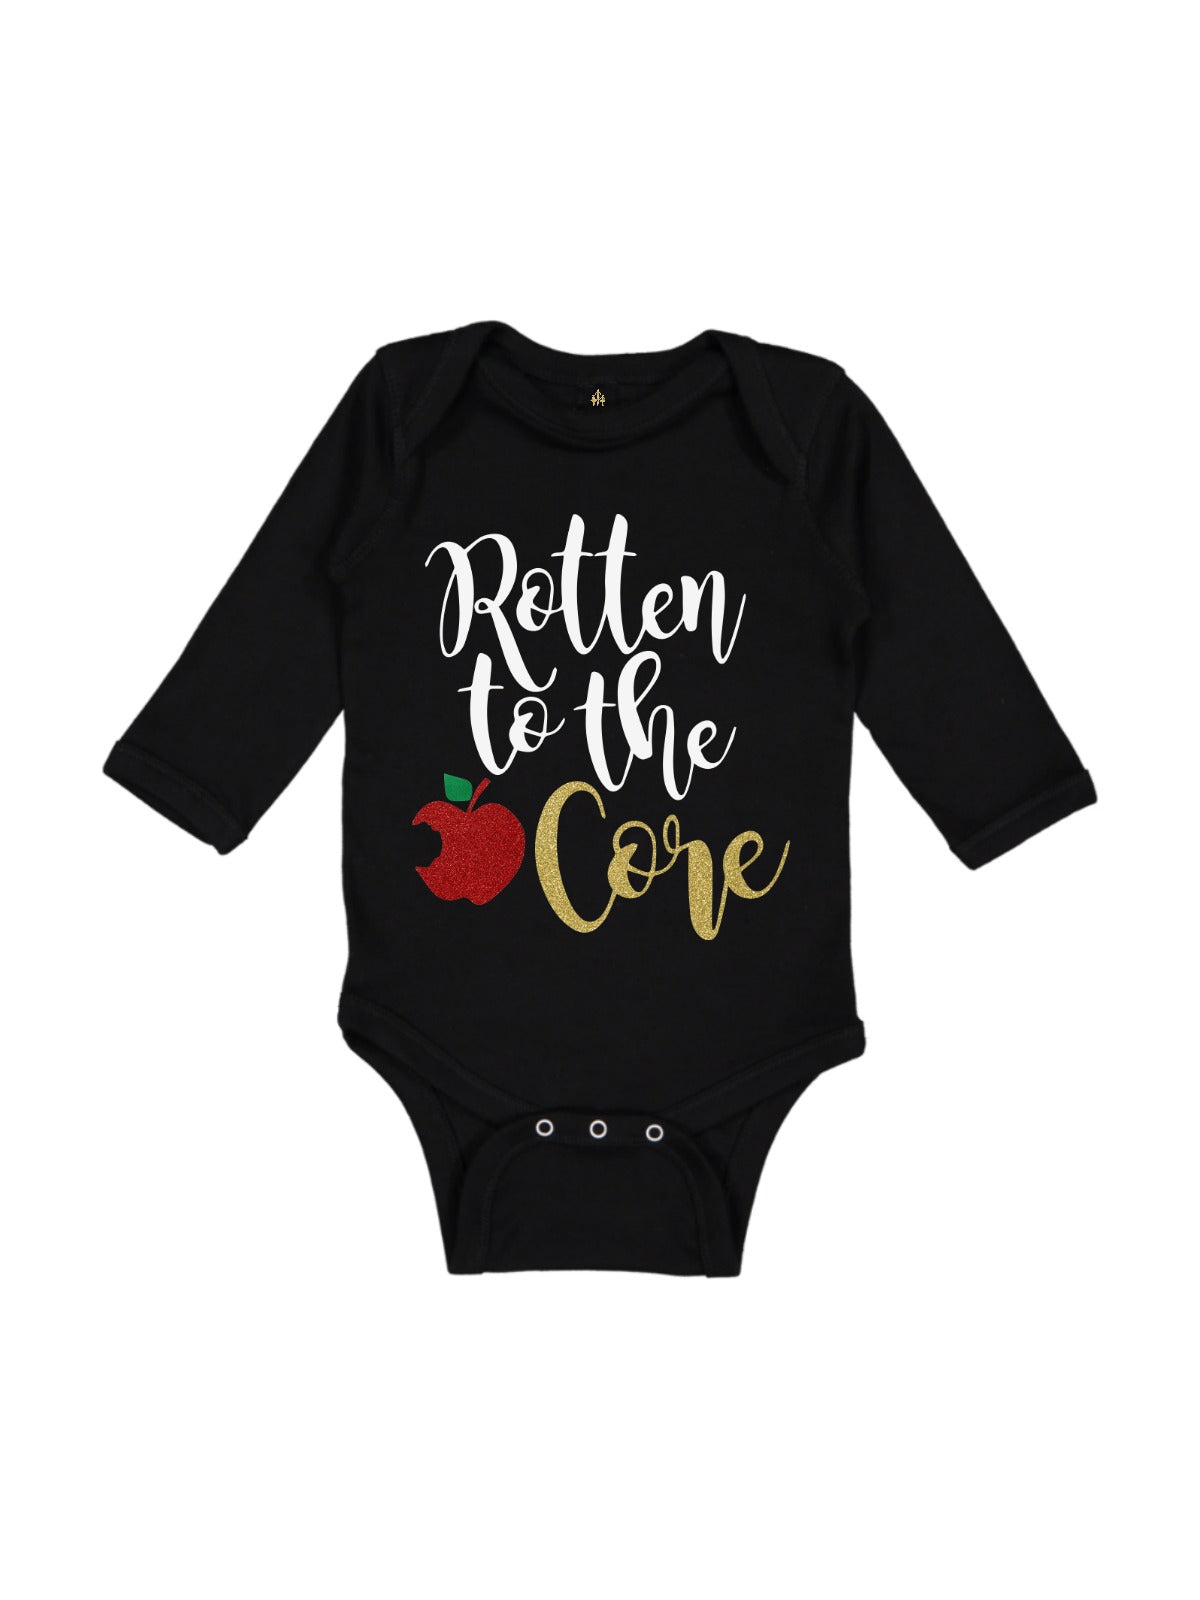 Rotten to the Core Baby Girl Bodysuit for Fall